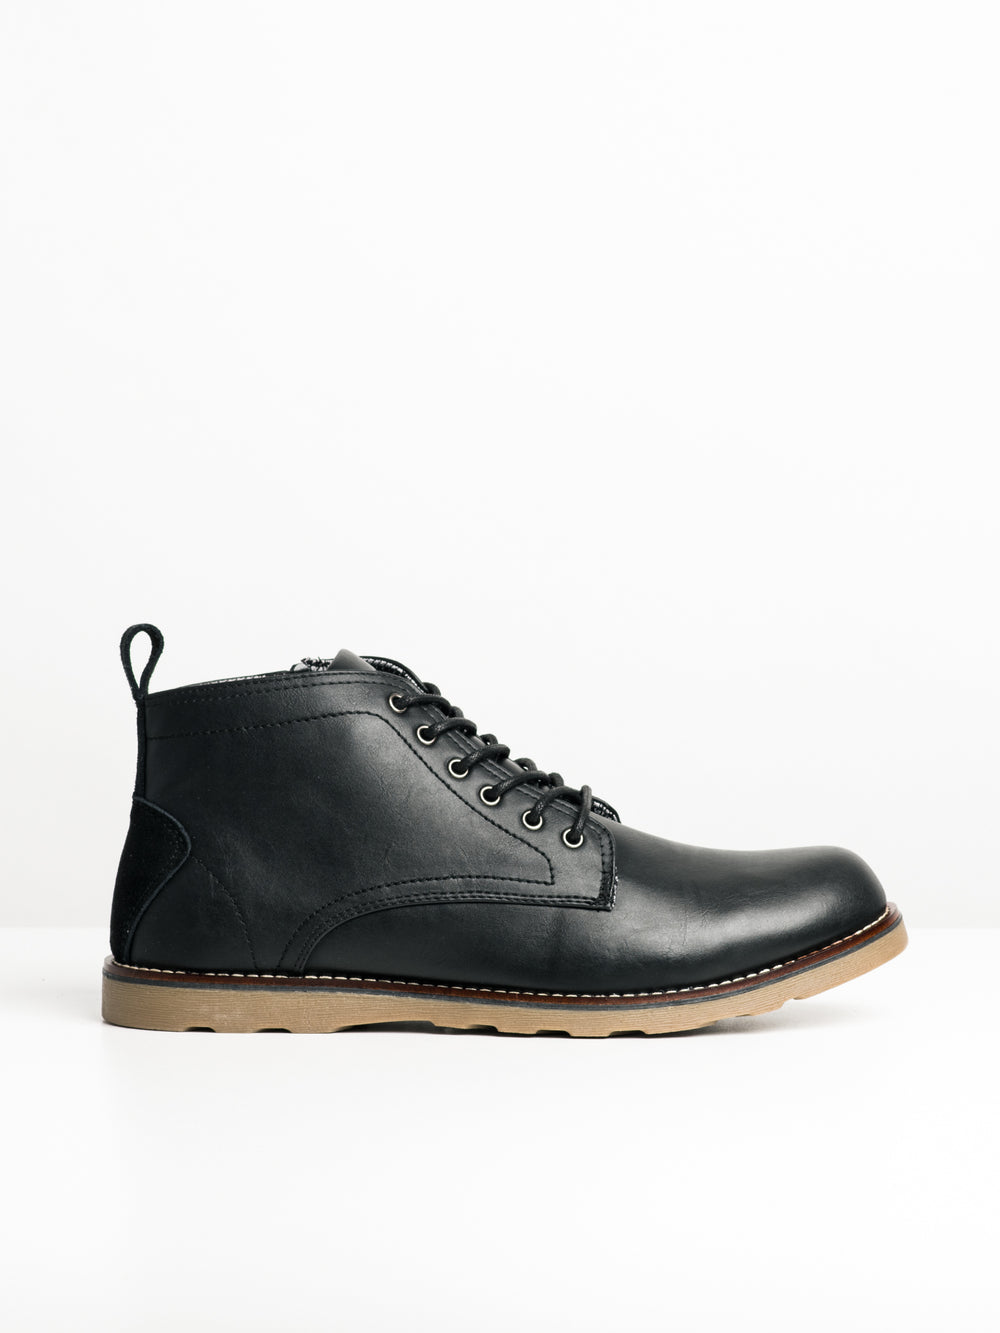 MENS BLACKWELL LAWRENCE BOOT  - CLEARANCE